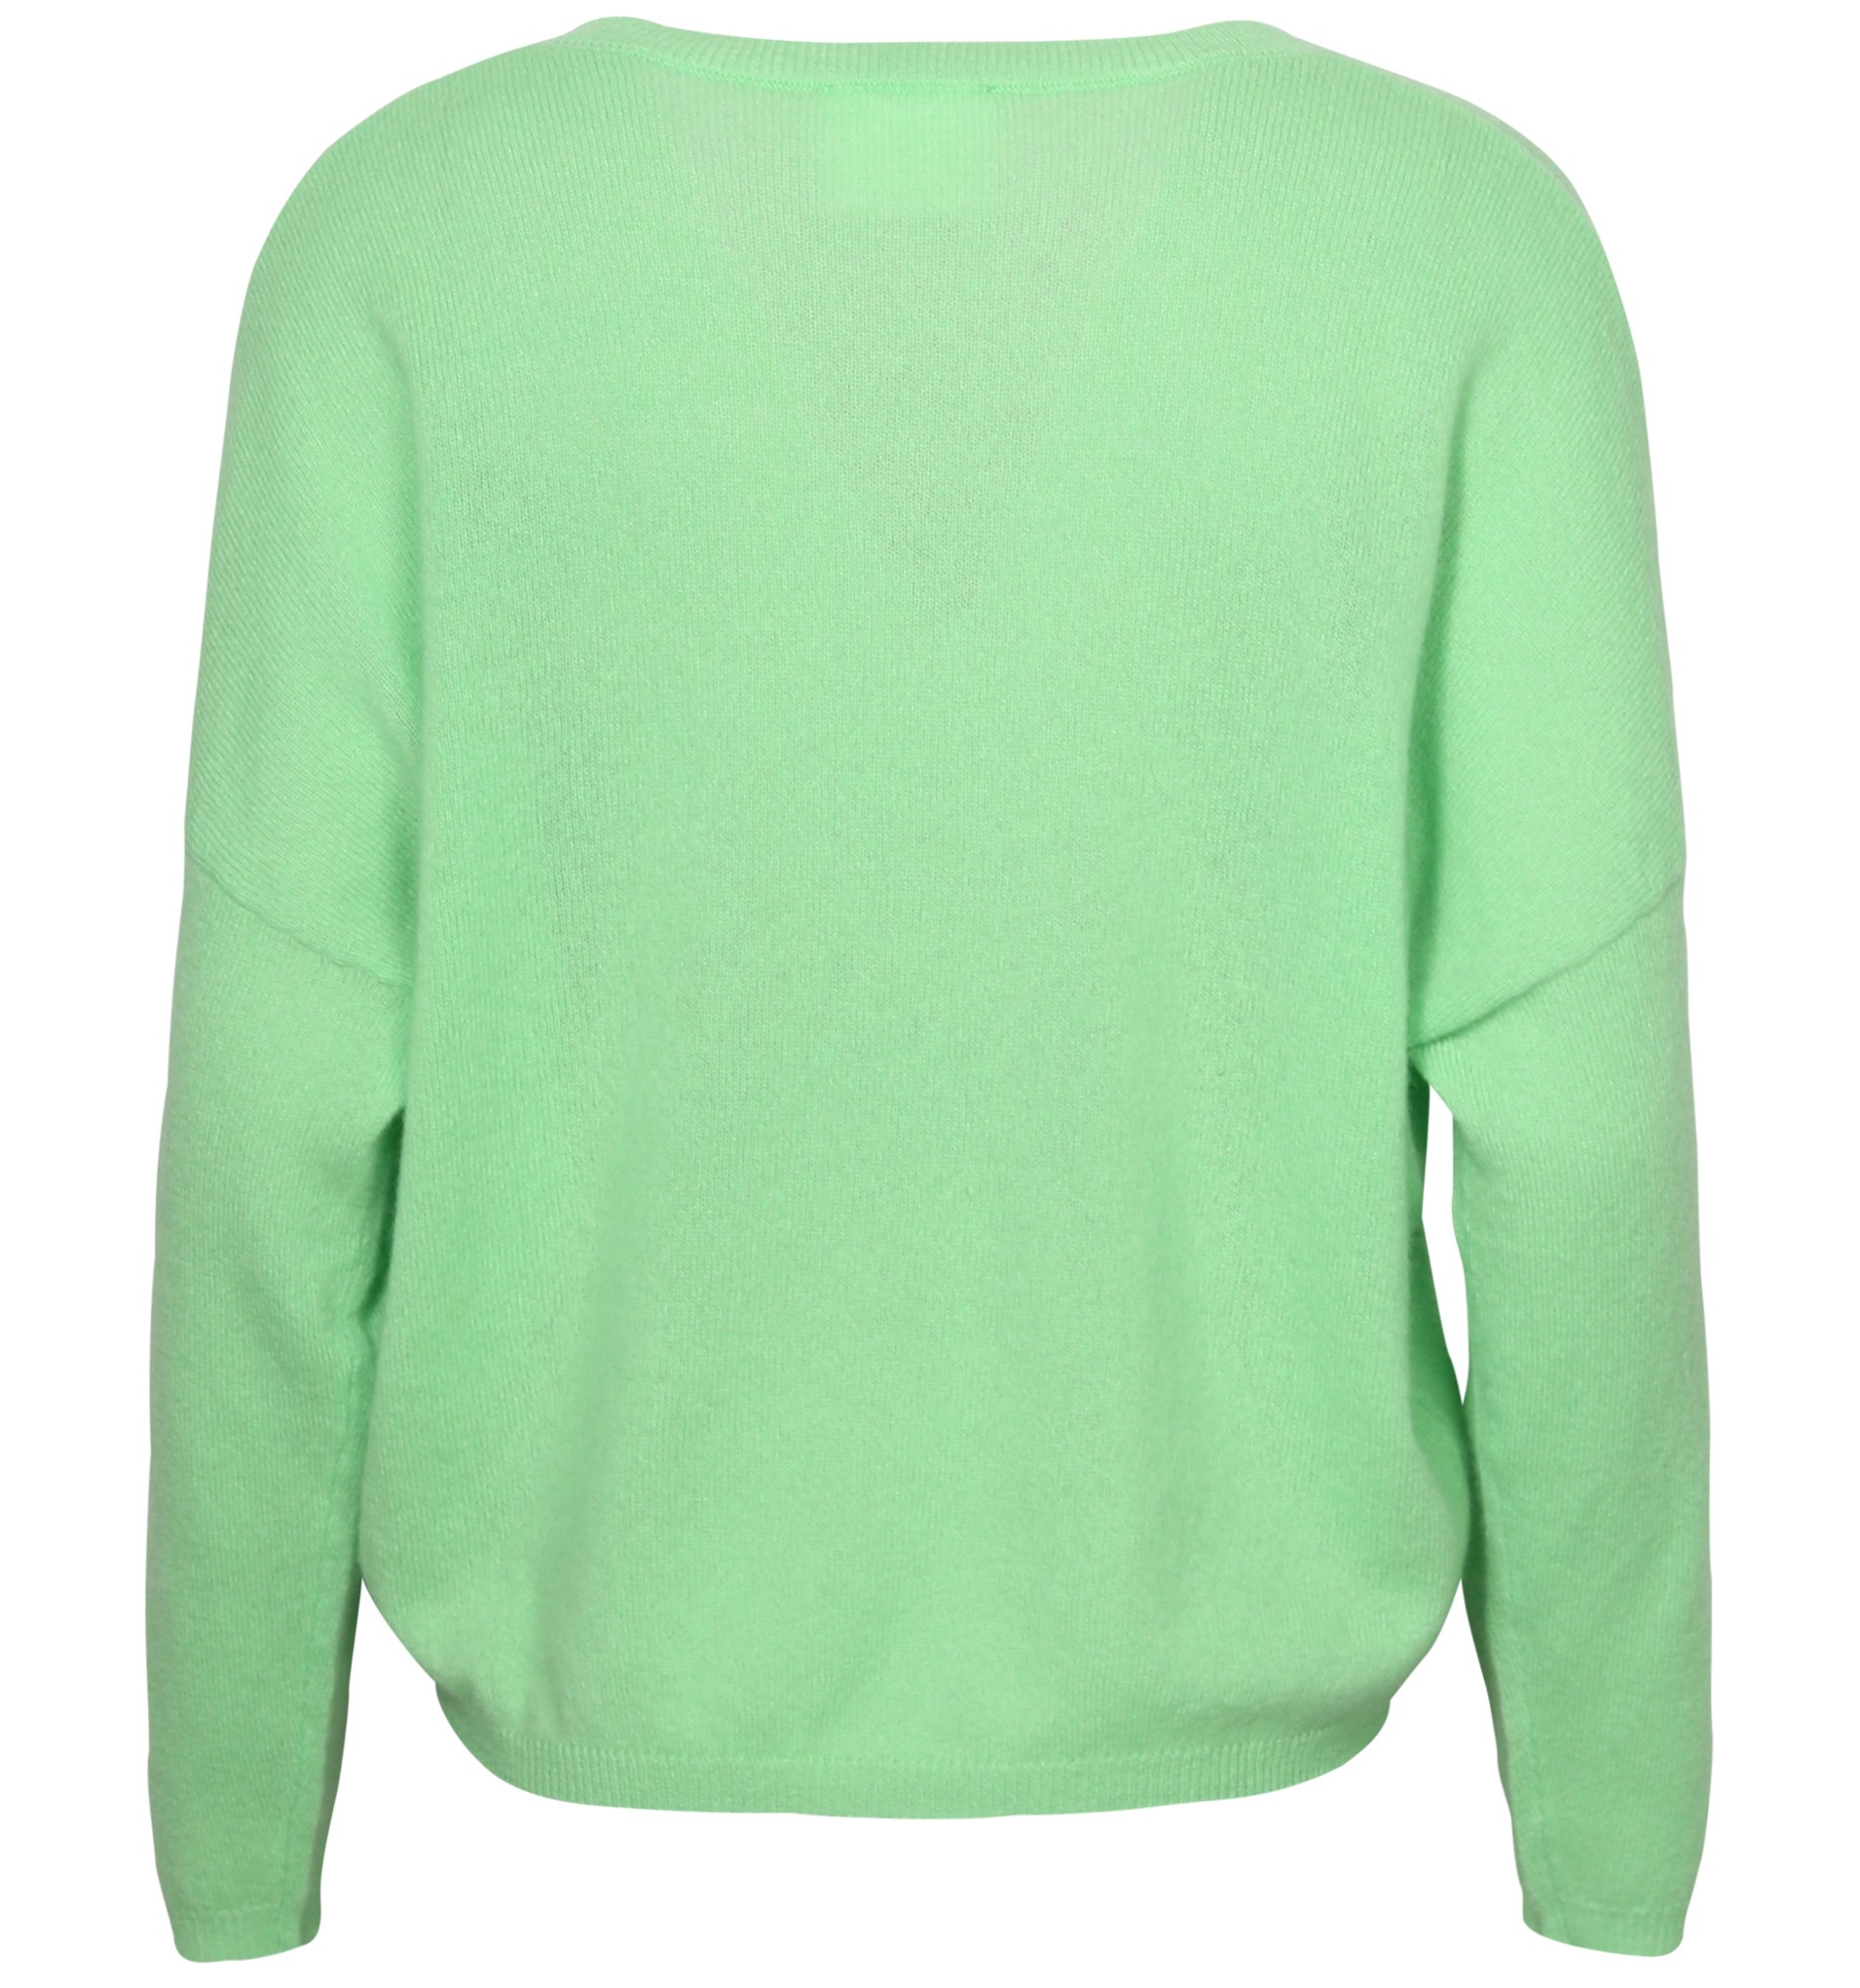 ABSOLUT CASHMERE V-Neck Sweater in Light Green